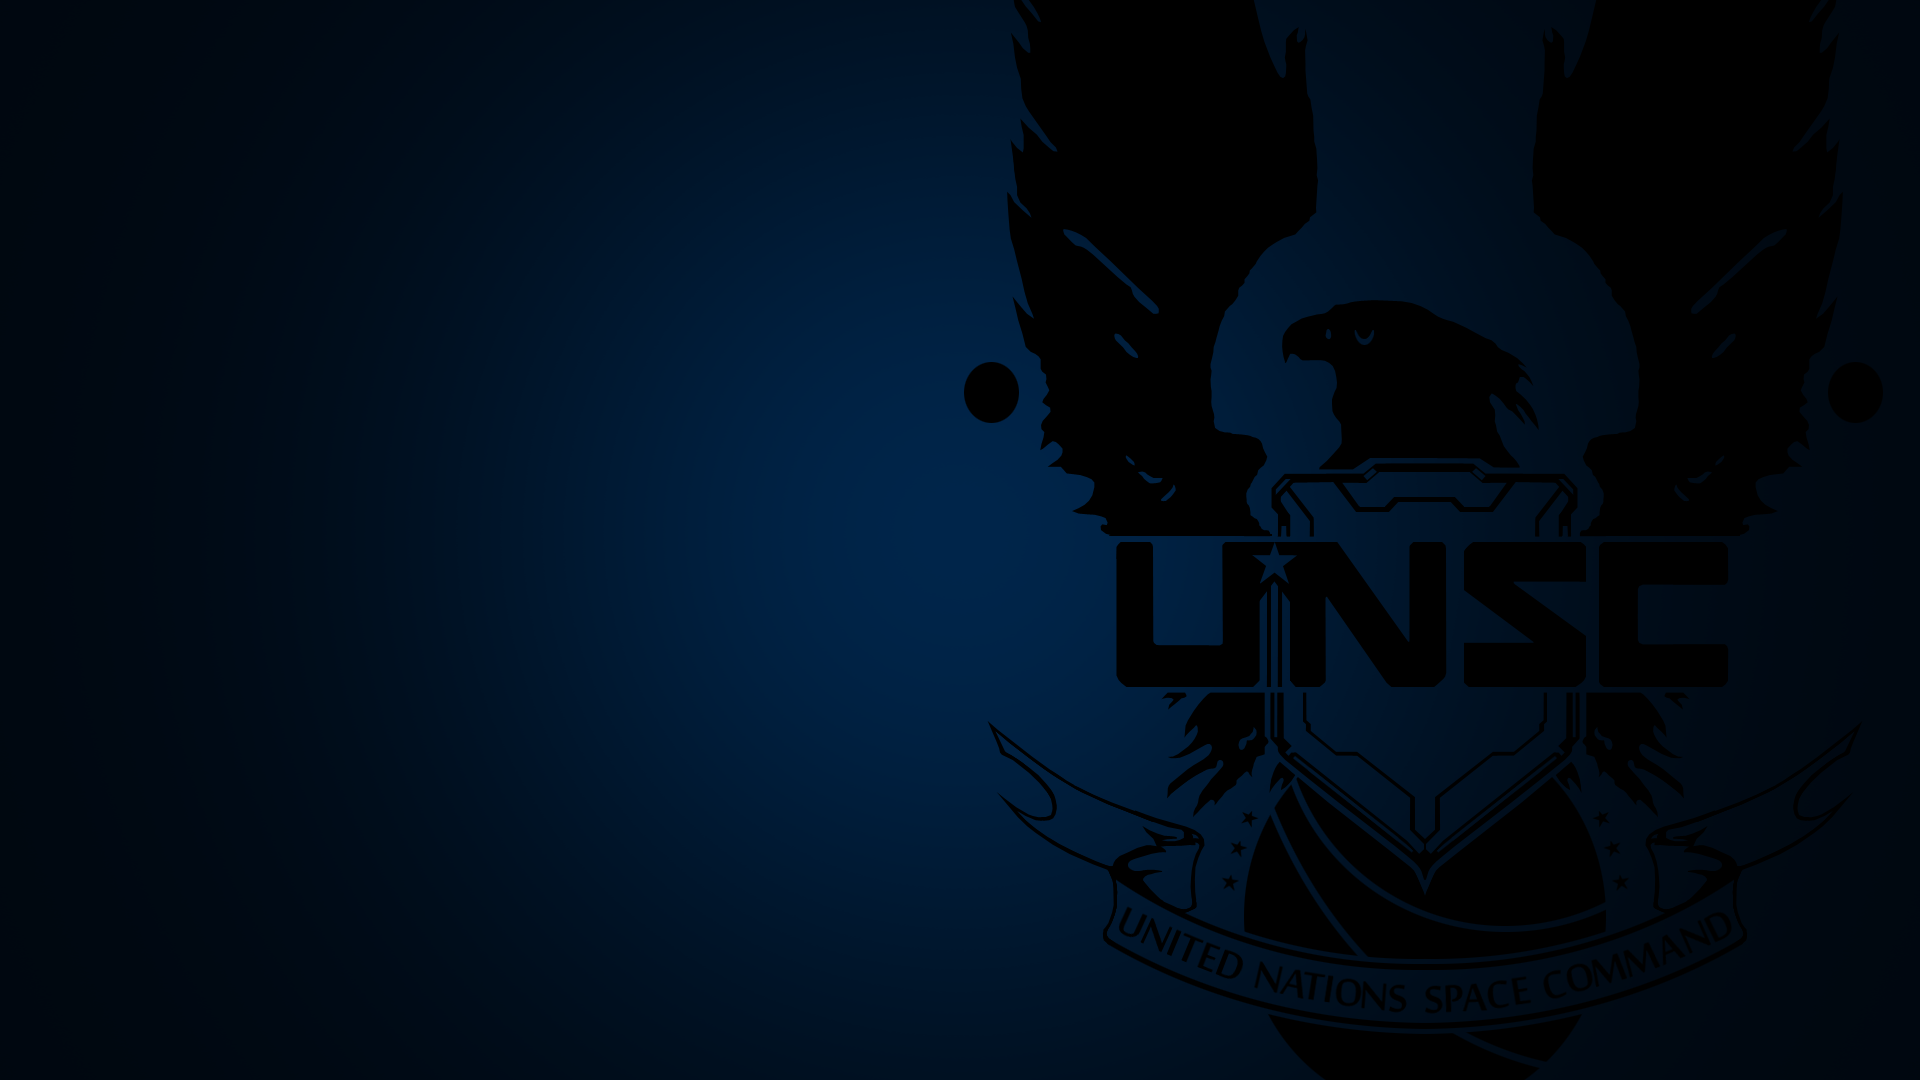 Wallpapers For > Halo Unsc Wallpapers